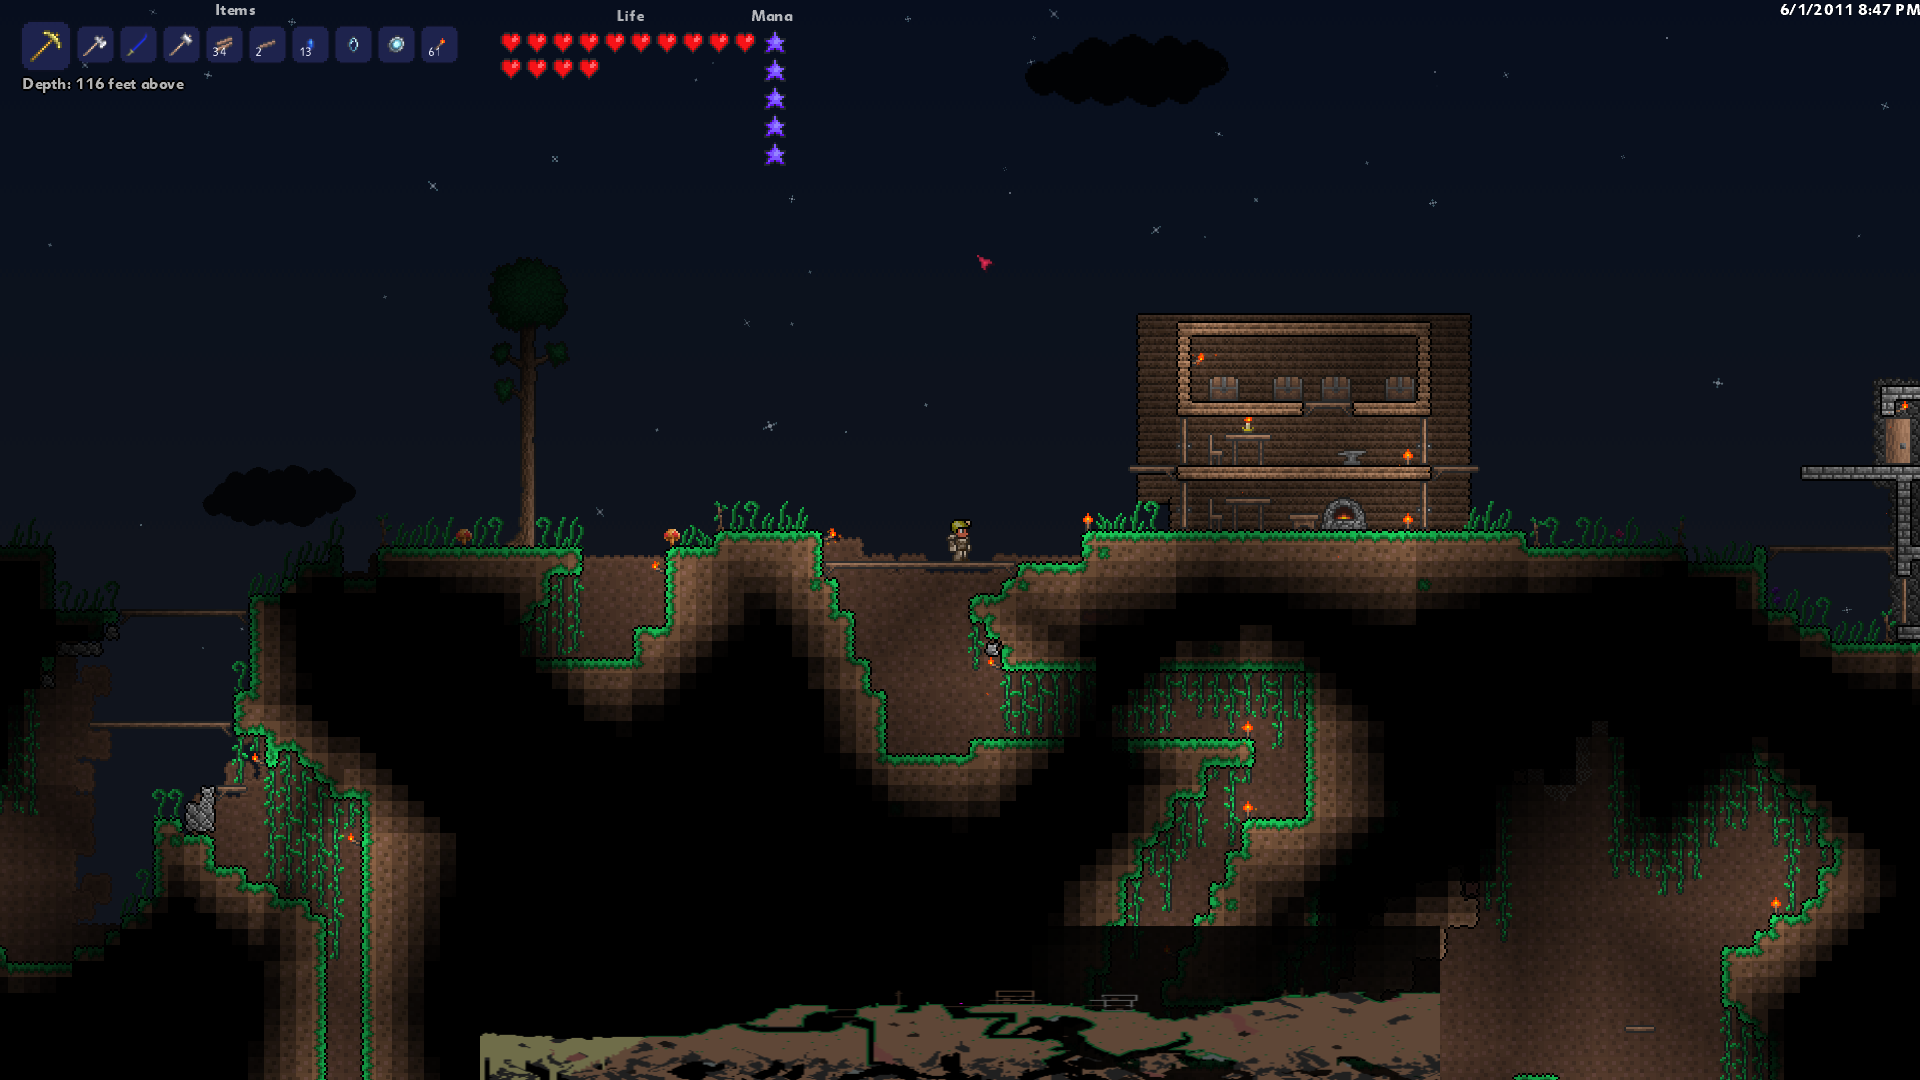 hacked world terraria download pc